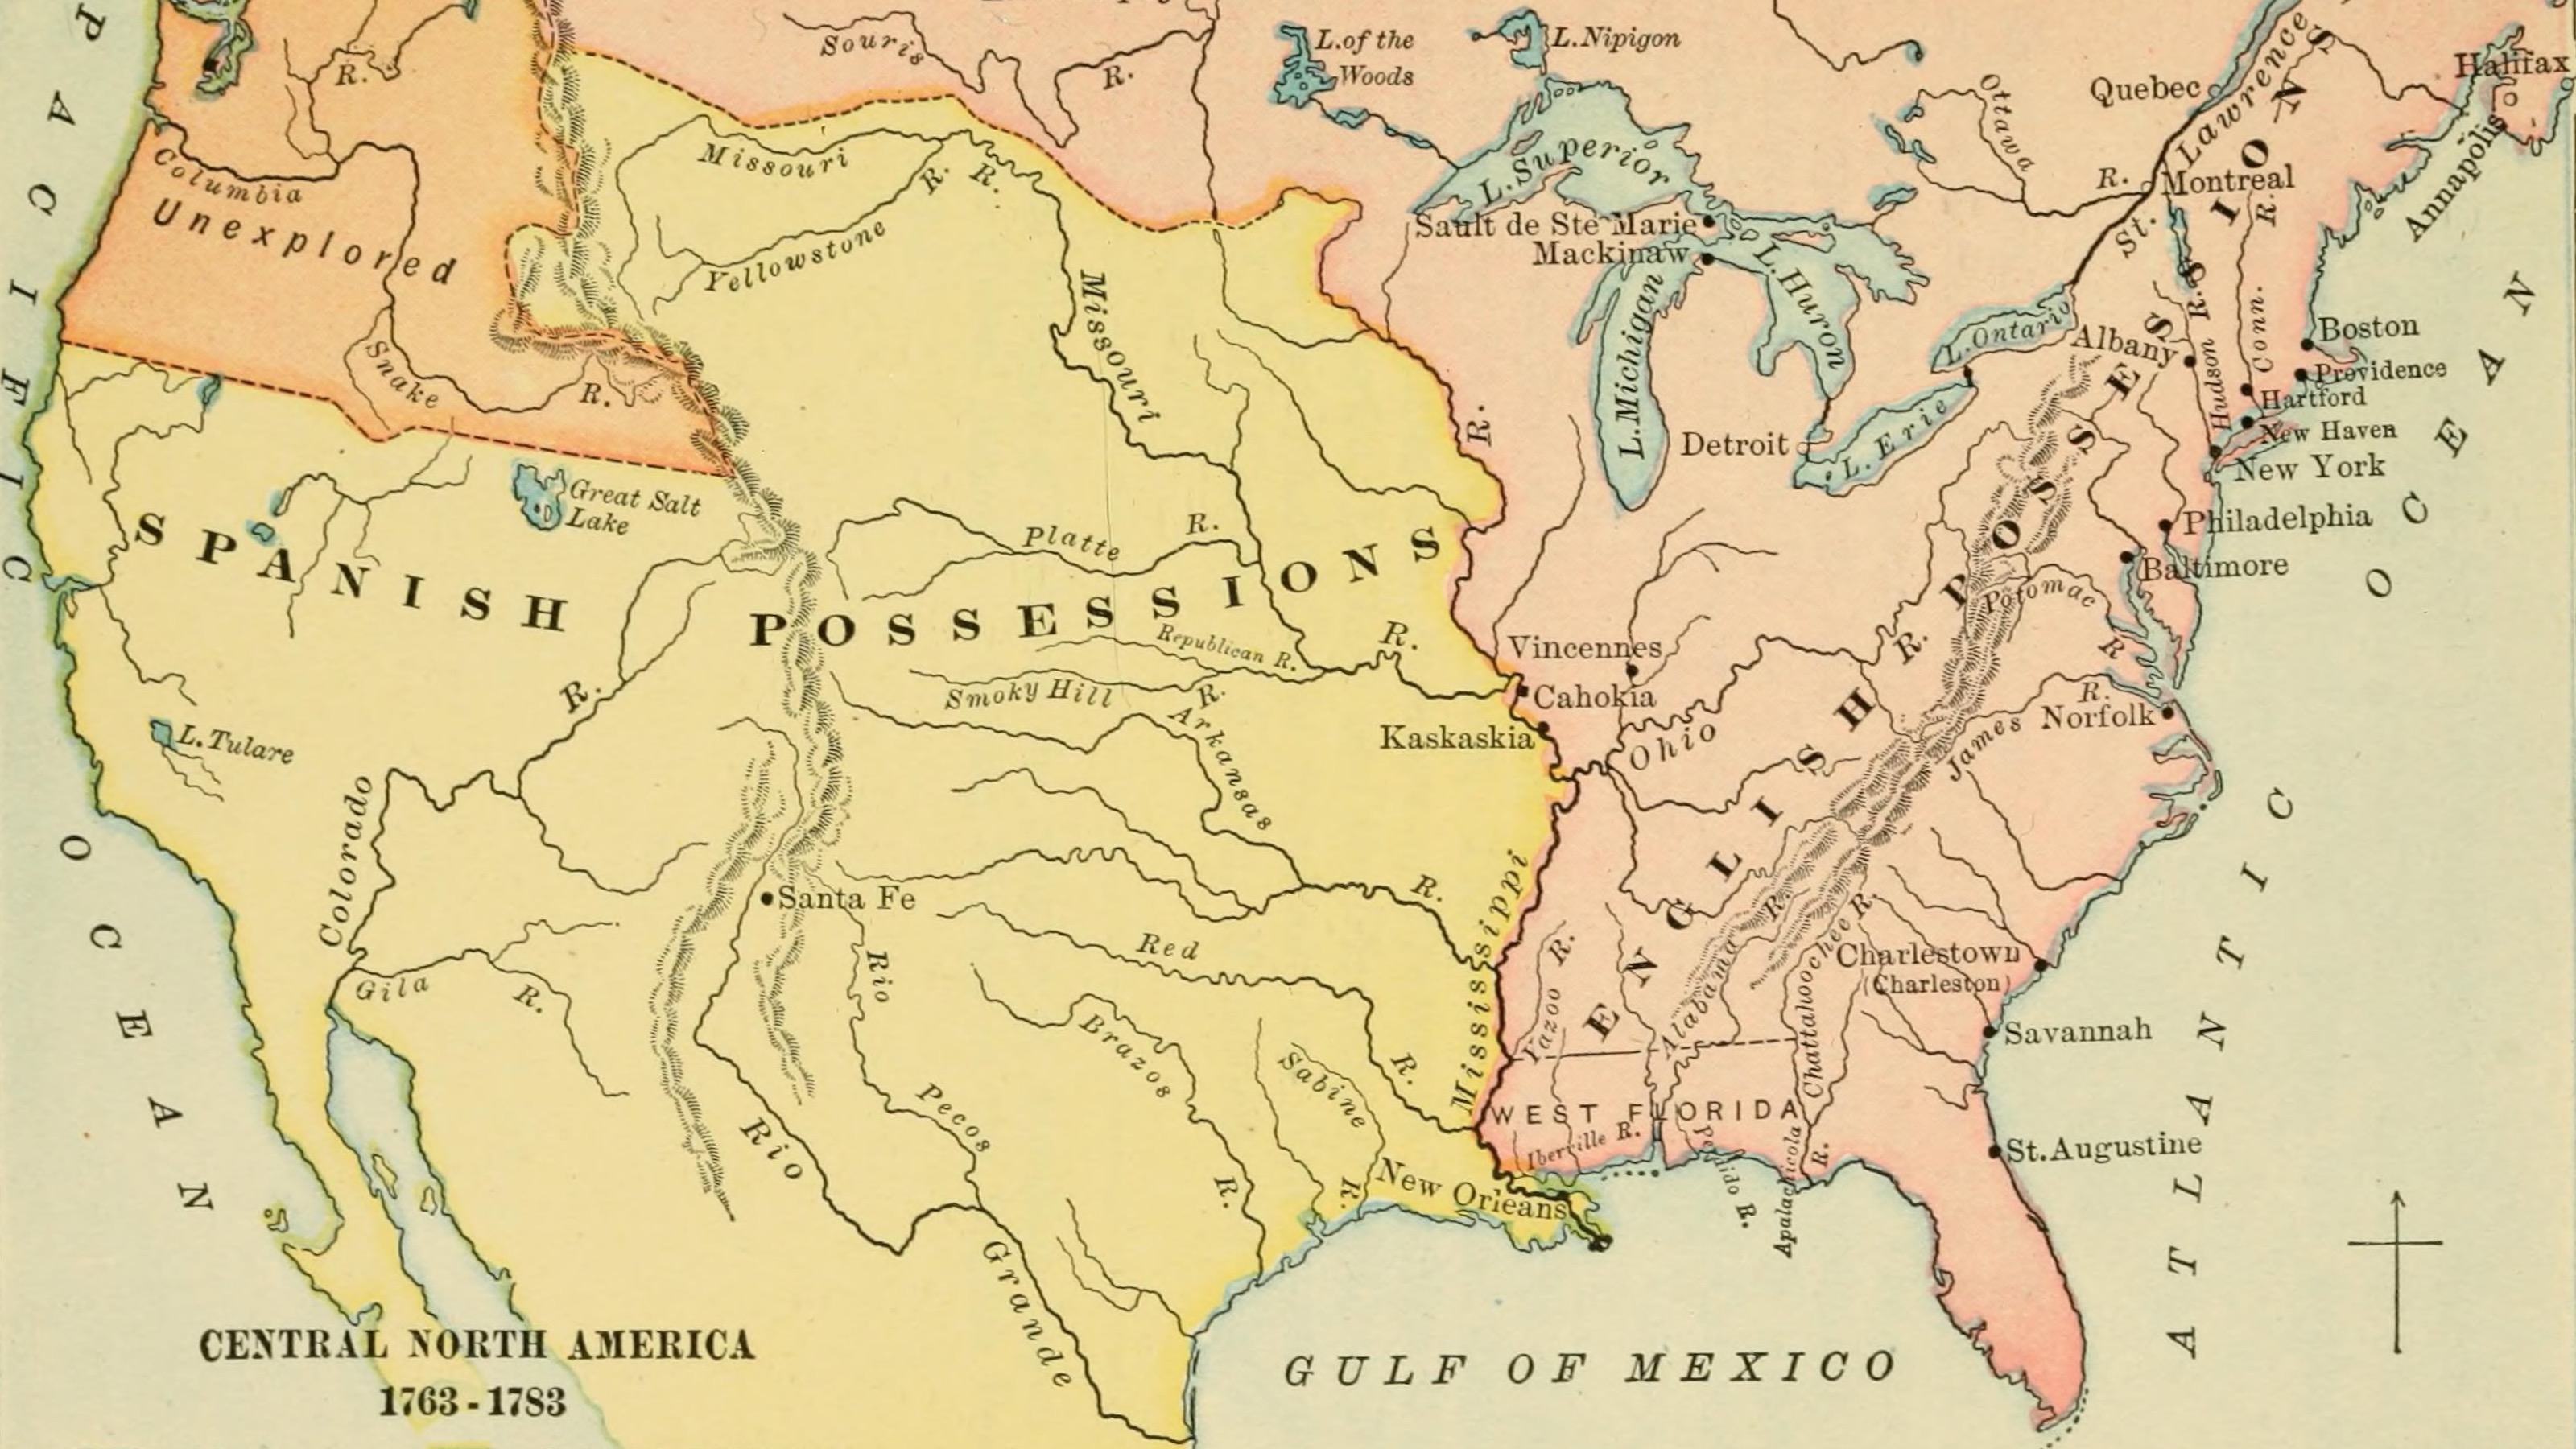 An ancient map depicting the independence of the United States.